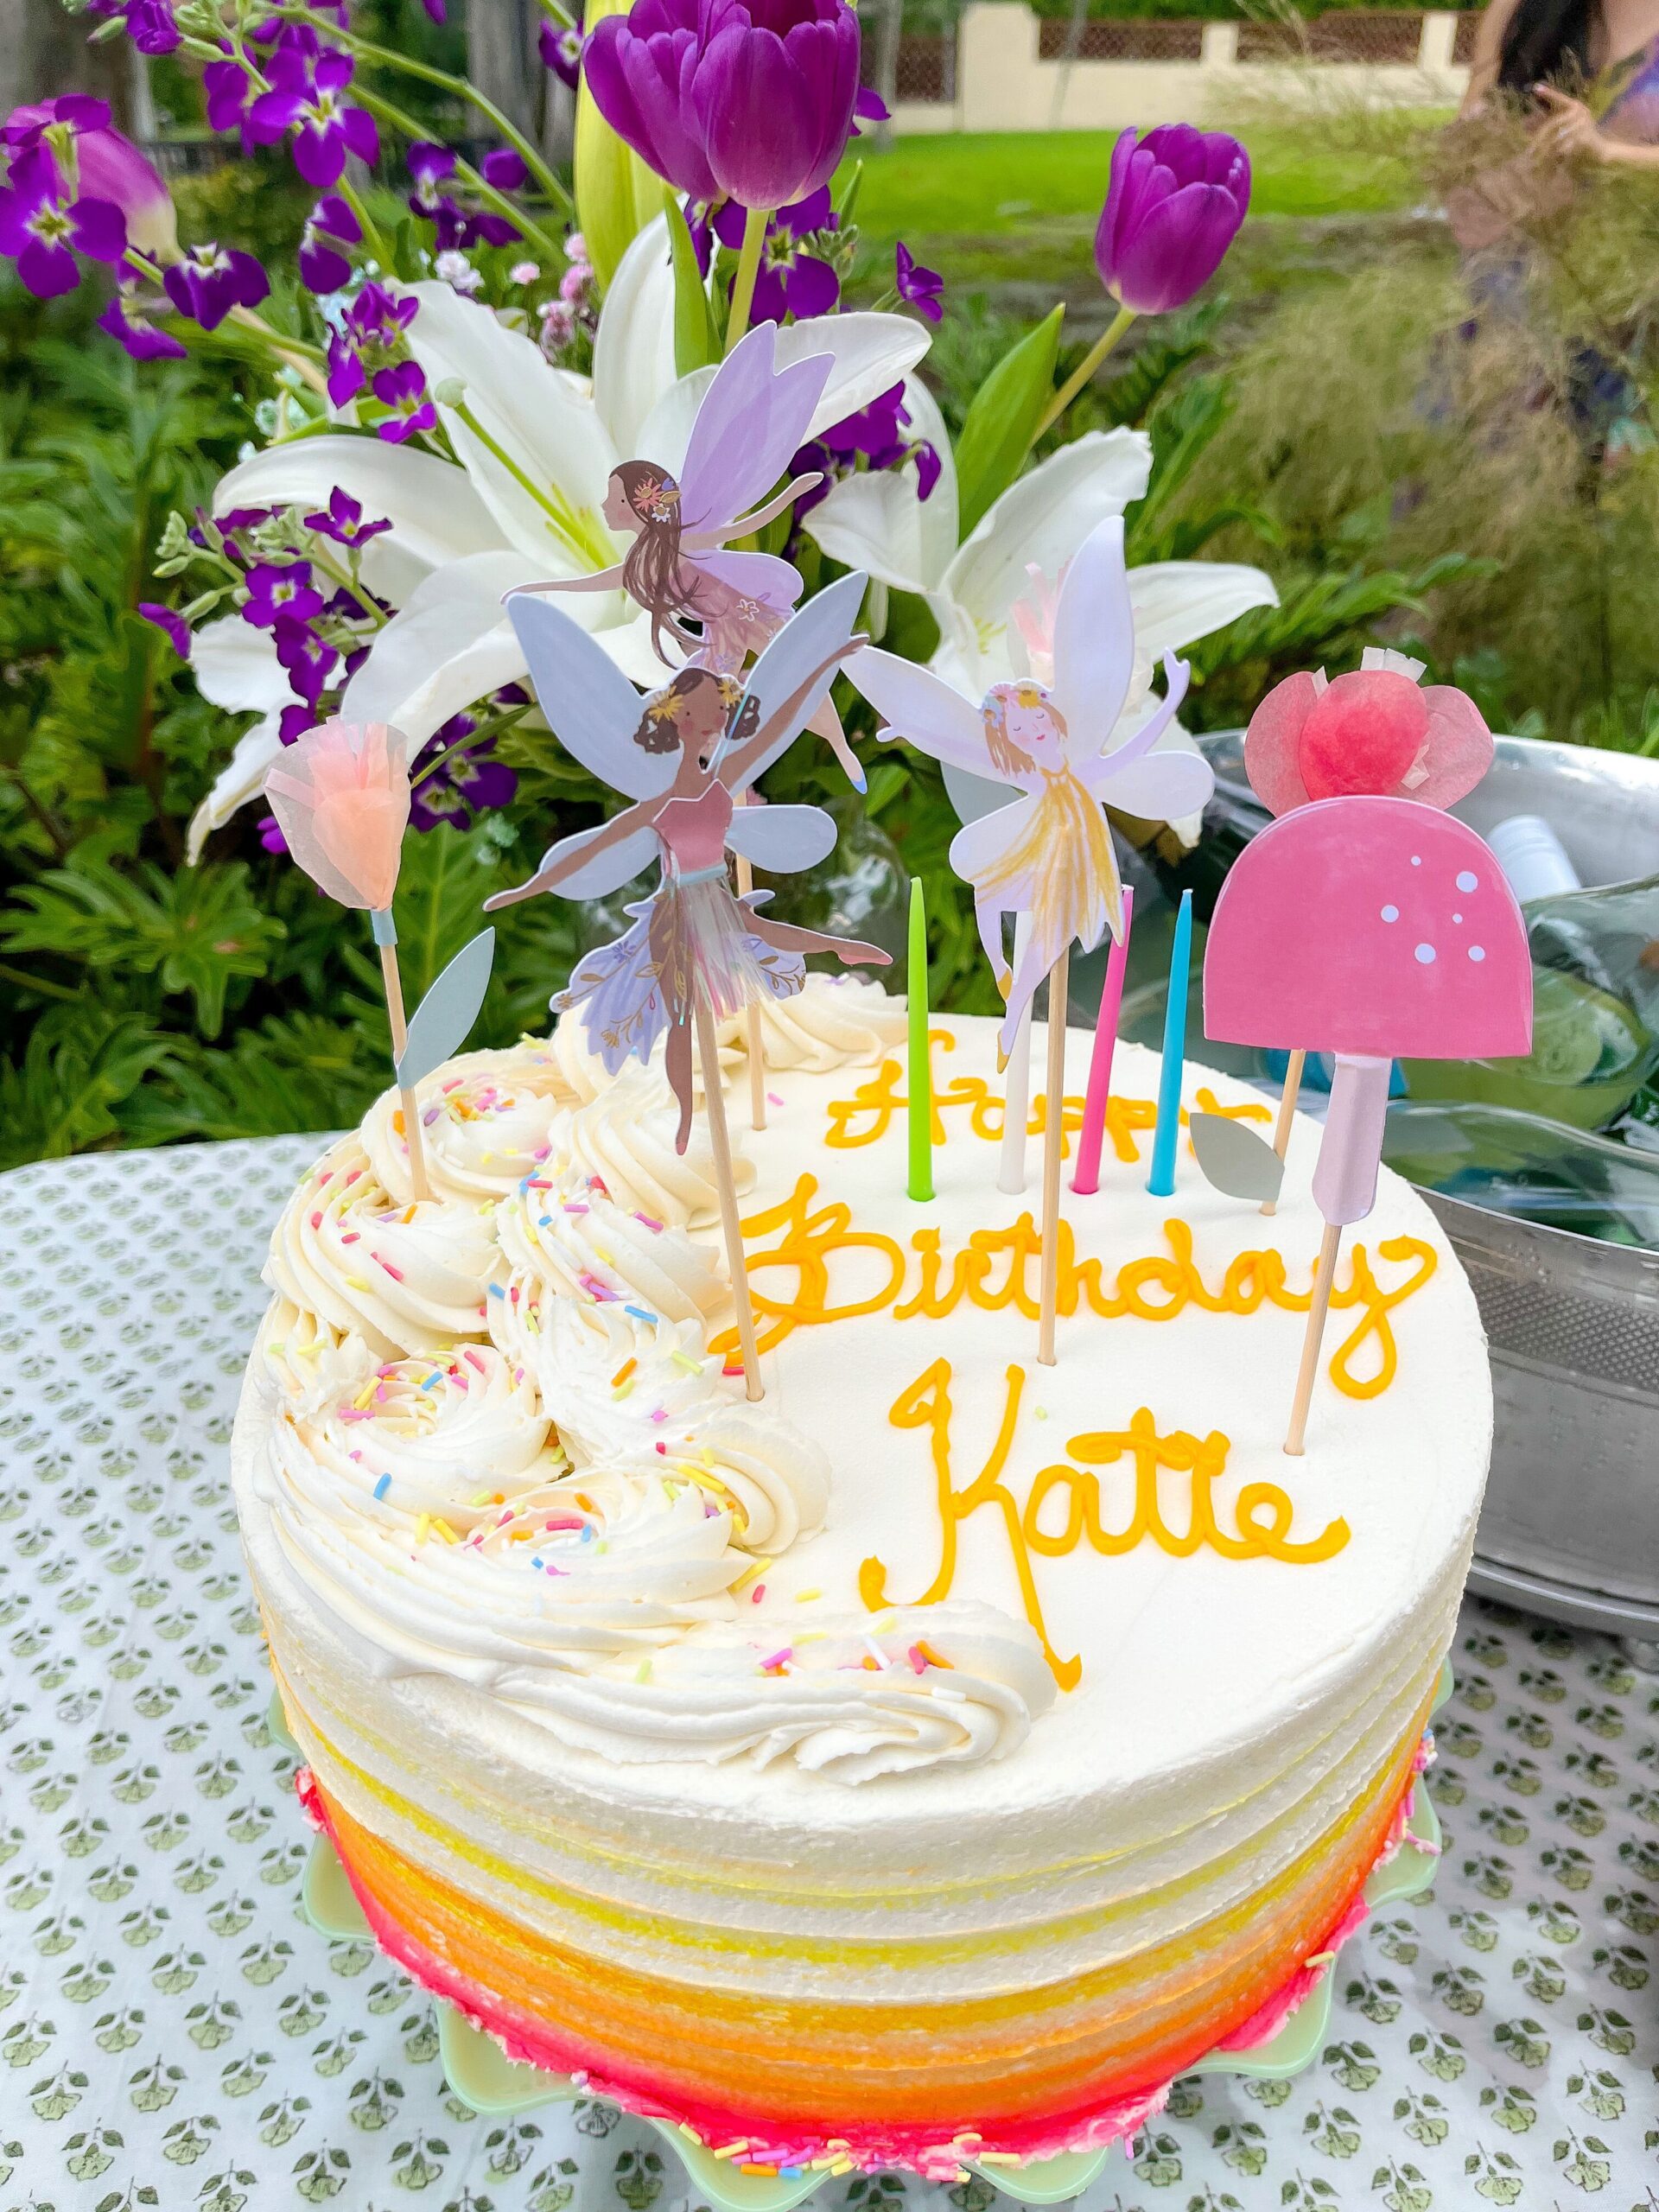 Katie's birthday cake from Valhalla Bakery with fairy cake toppers